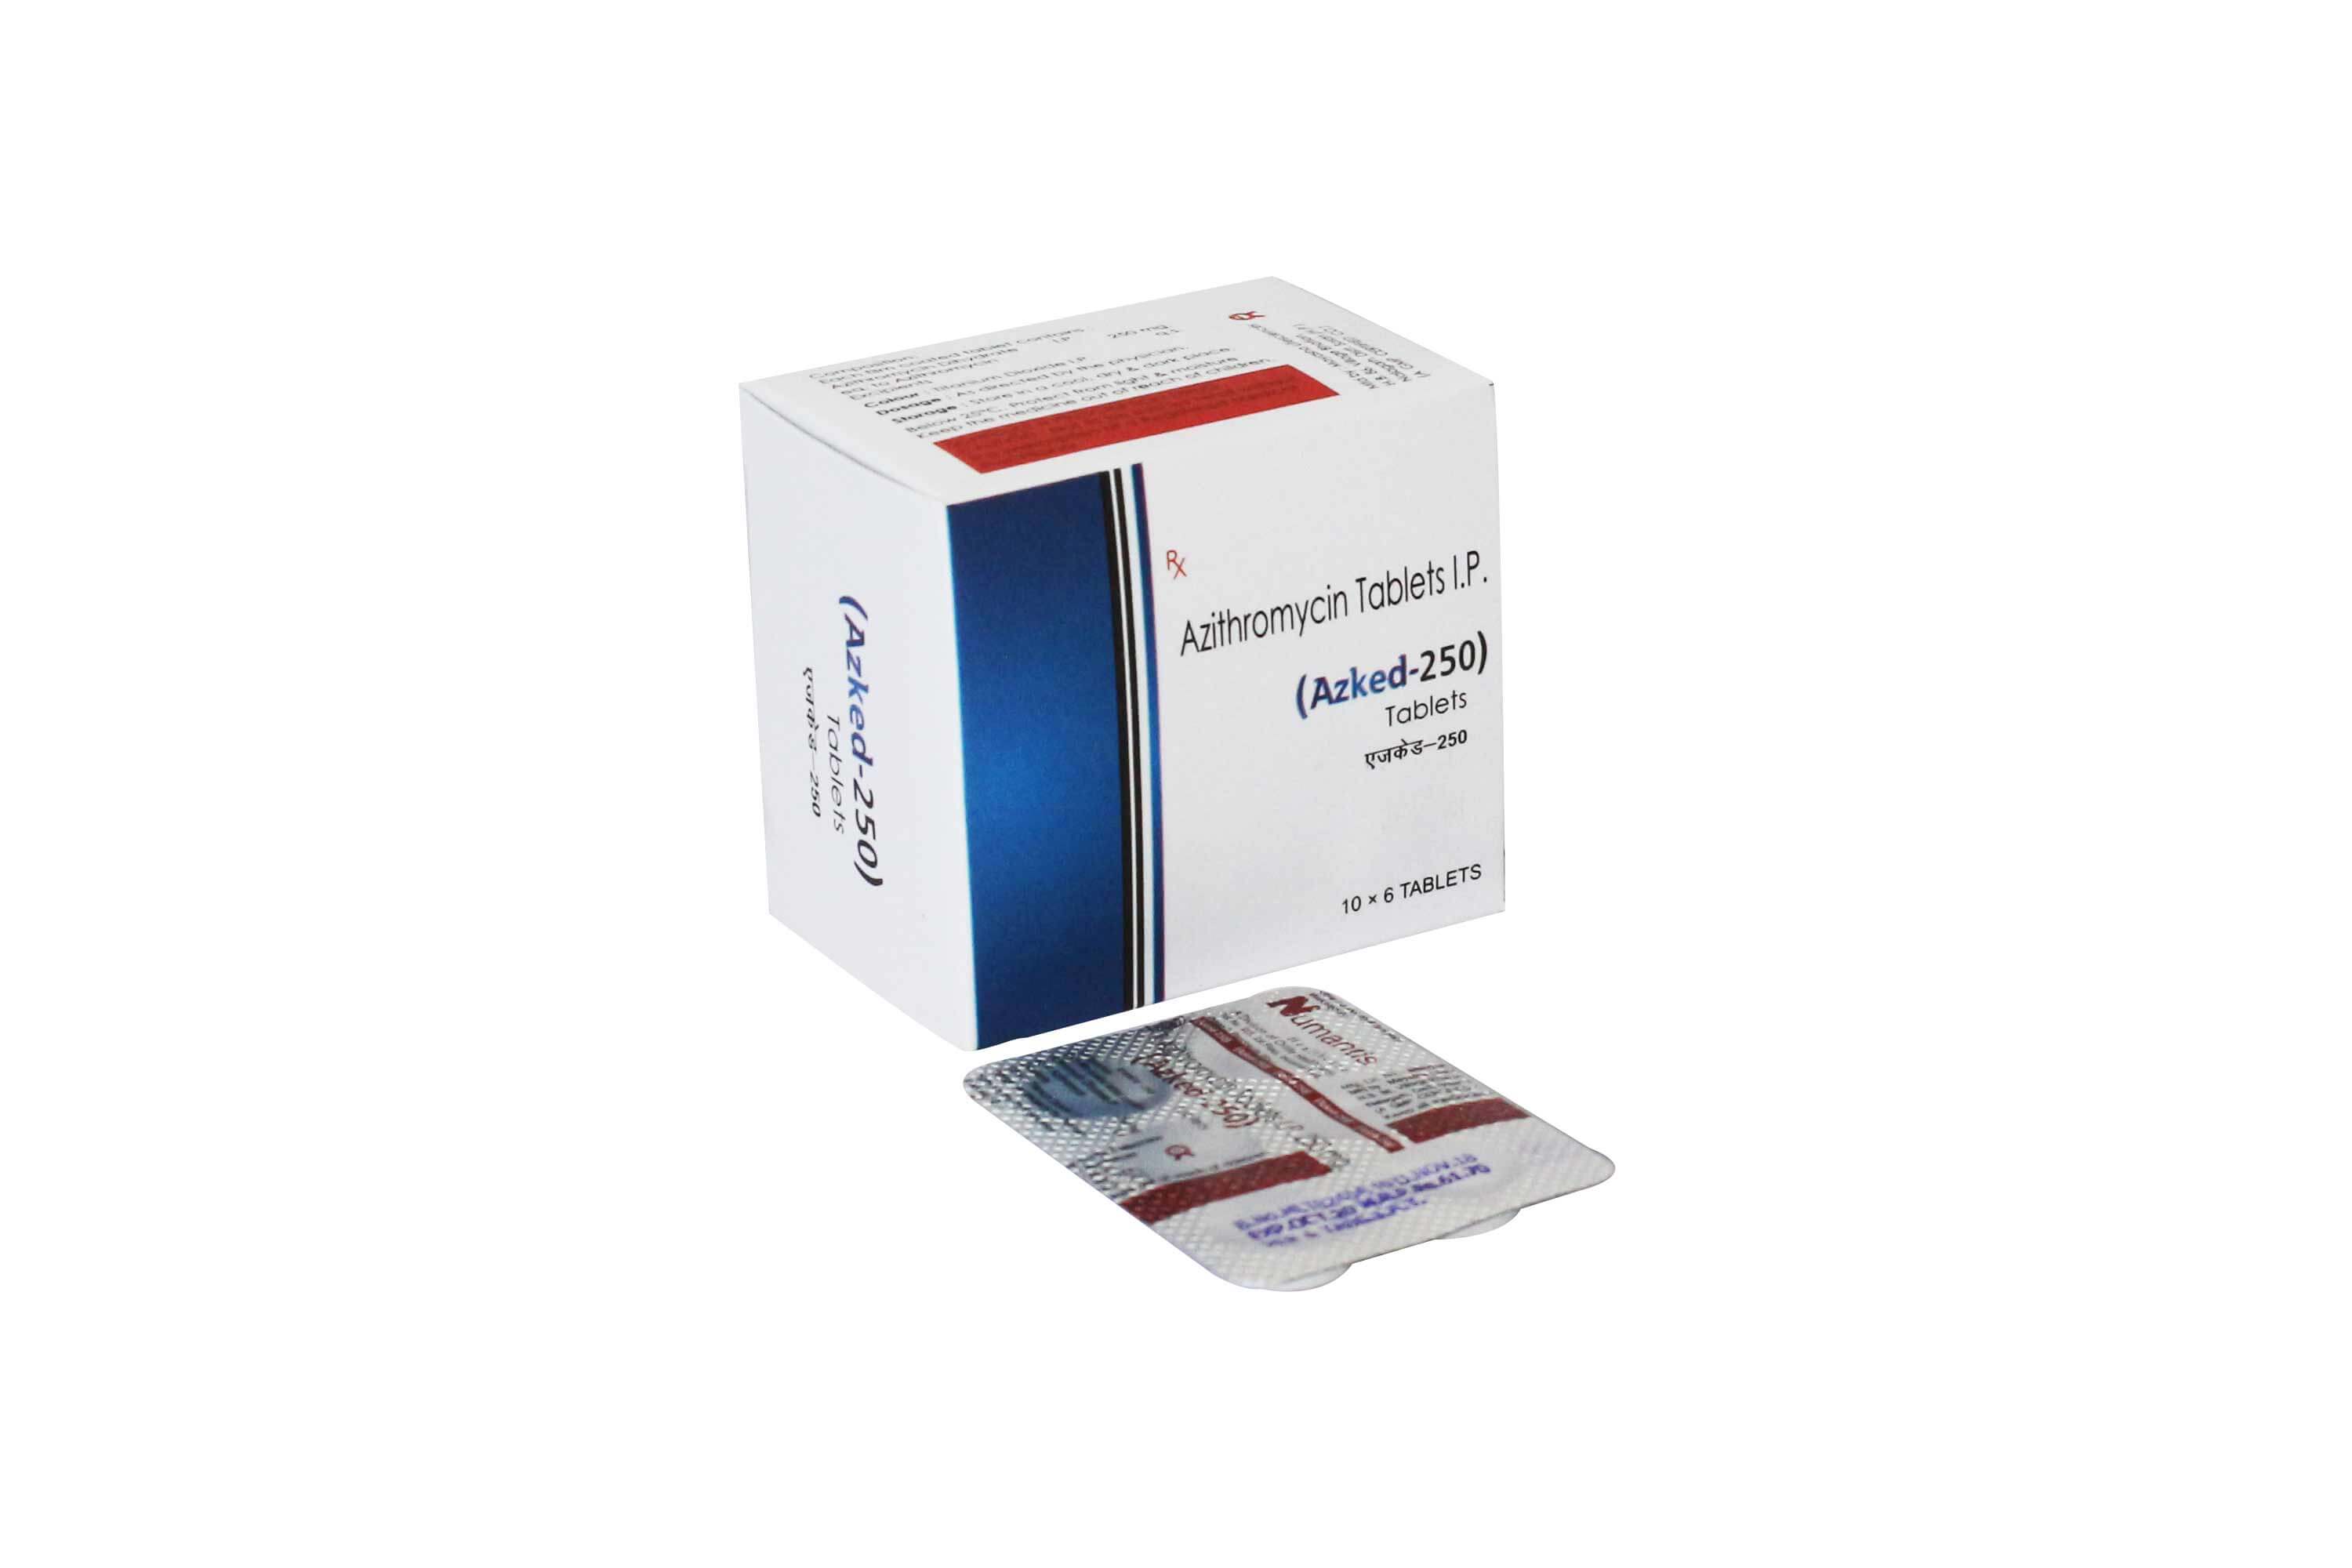 Product Name: Azked 250, Compositions of Azked 250 are Azithromycin tablets I.P.  - Numantis Healthcare